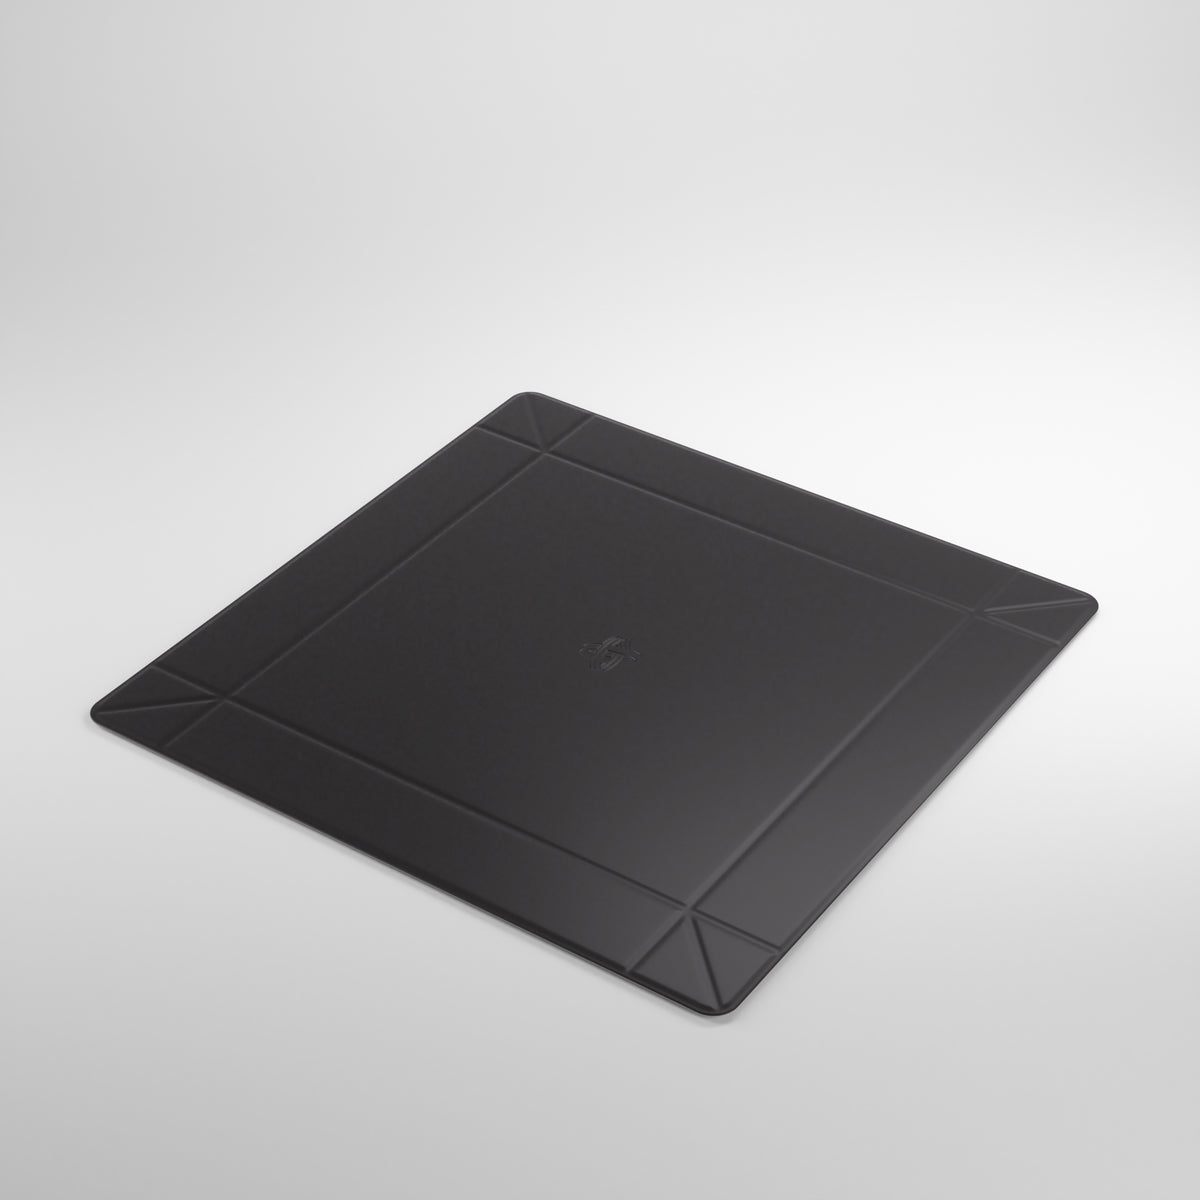 Magnetic Dice Tray Square Black/Gray